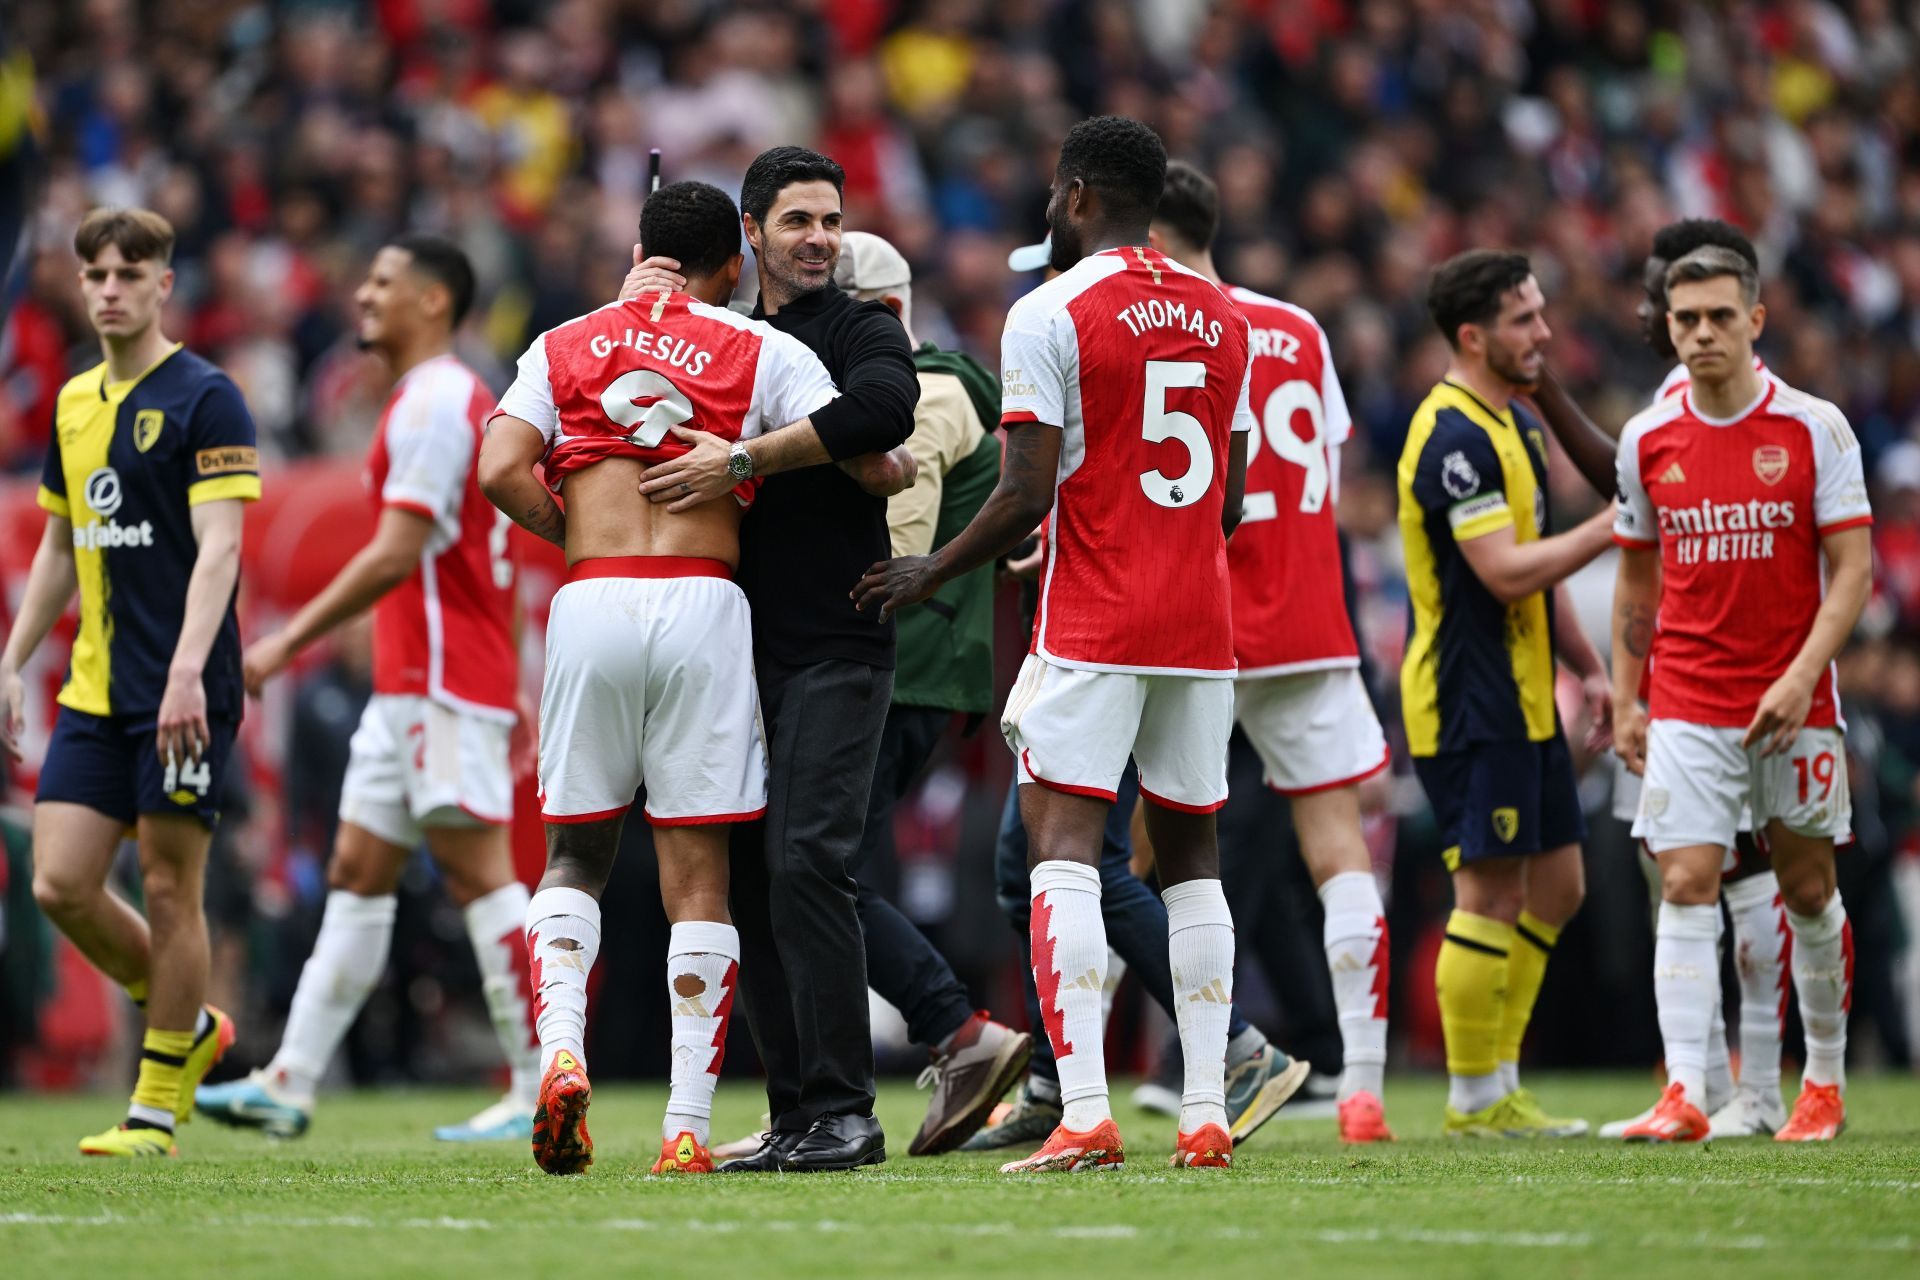 Mikel Arteta will be proud of his players no matter the outcome on Sunday.